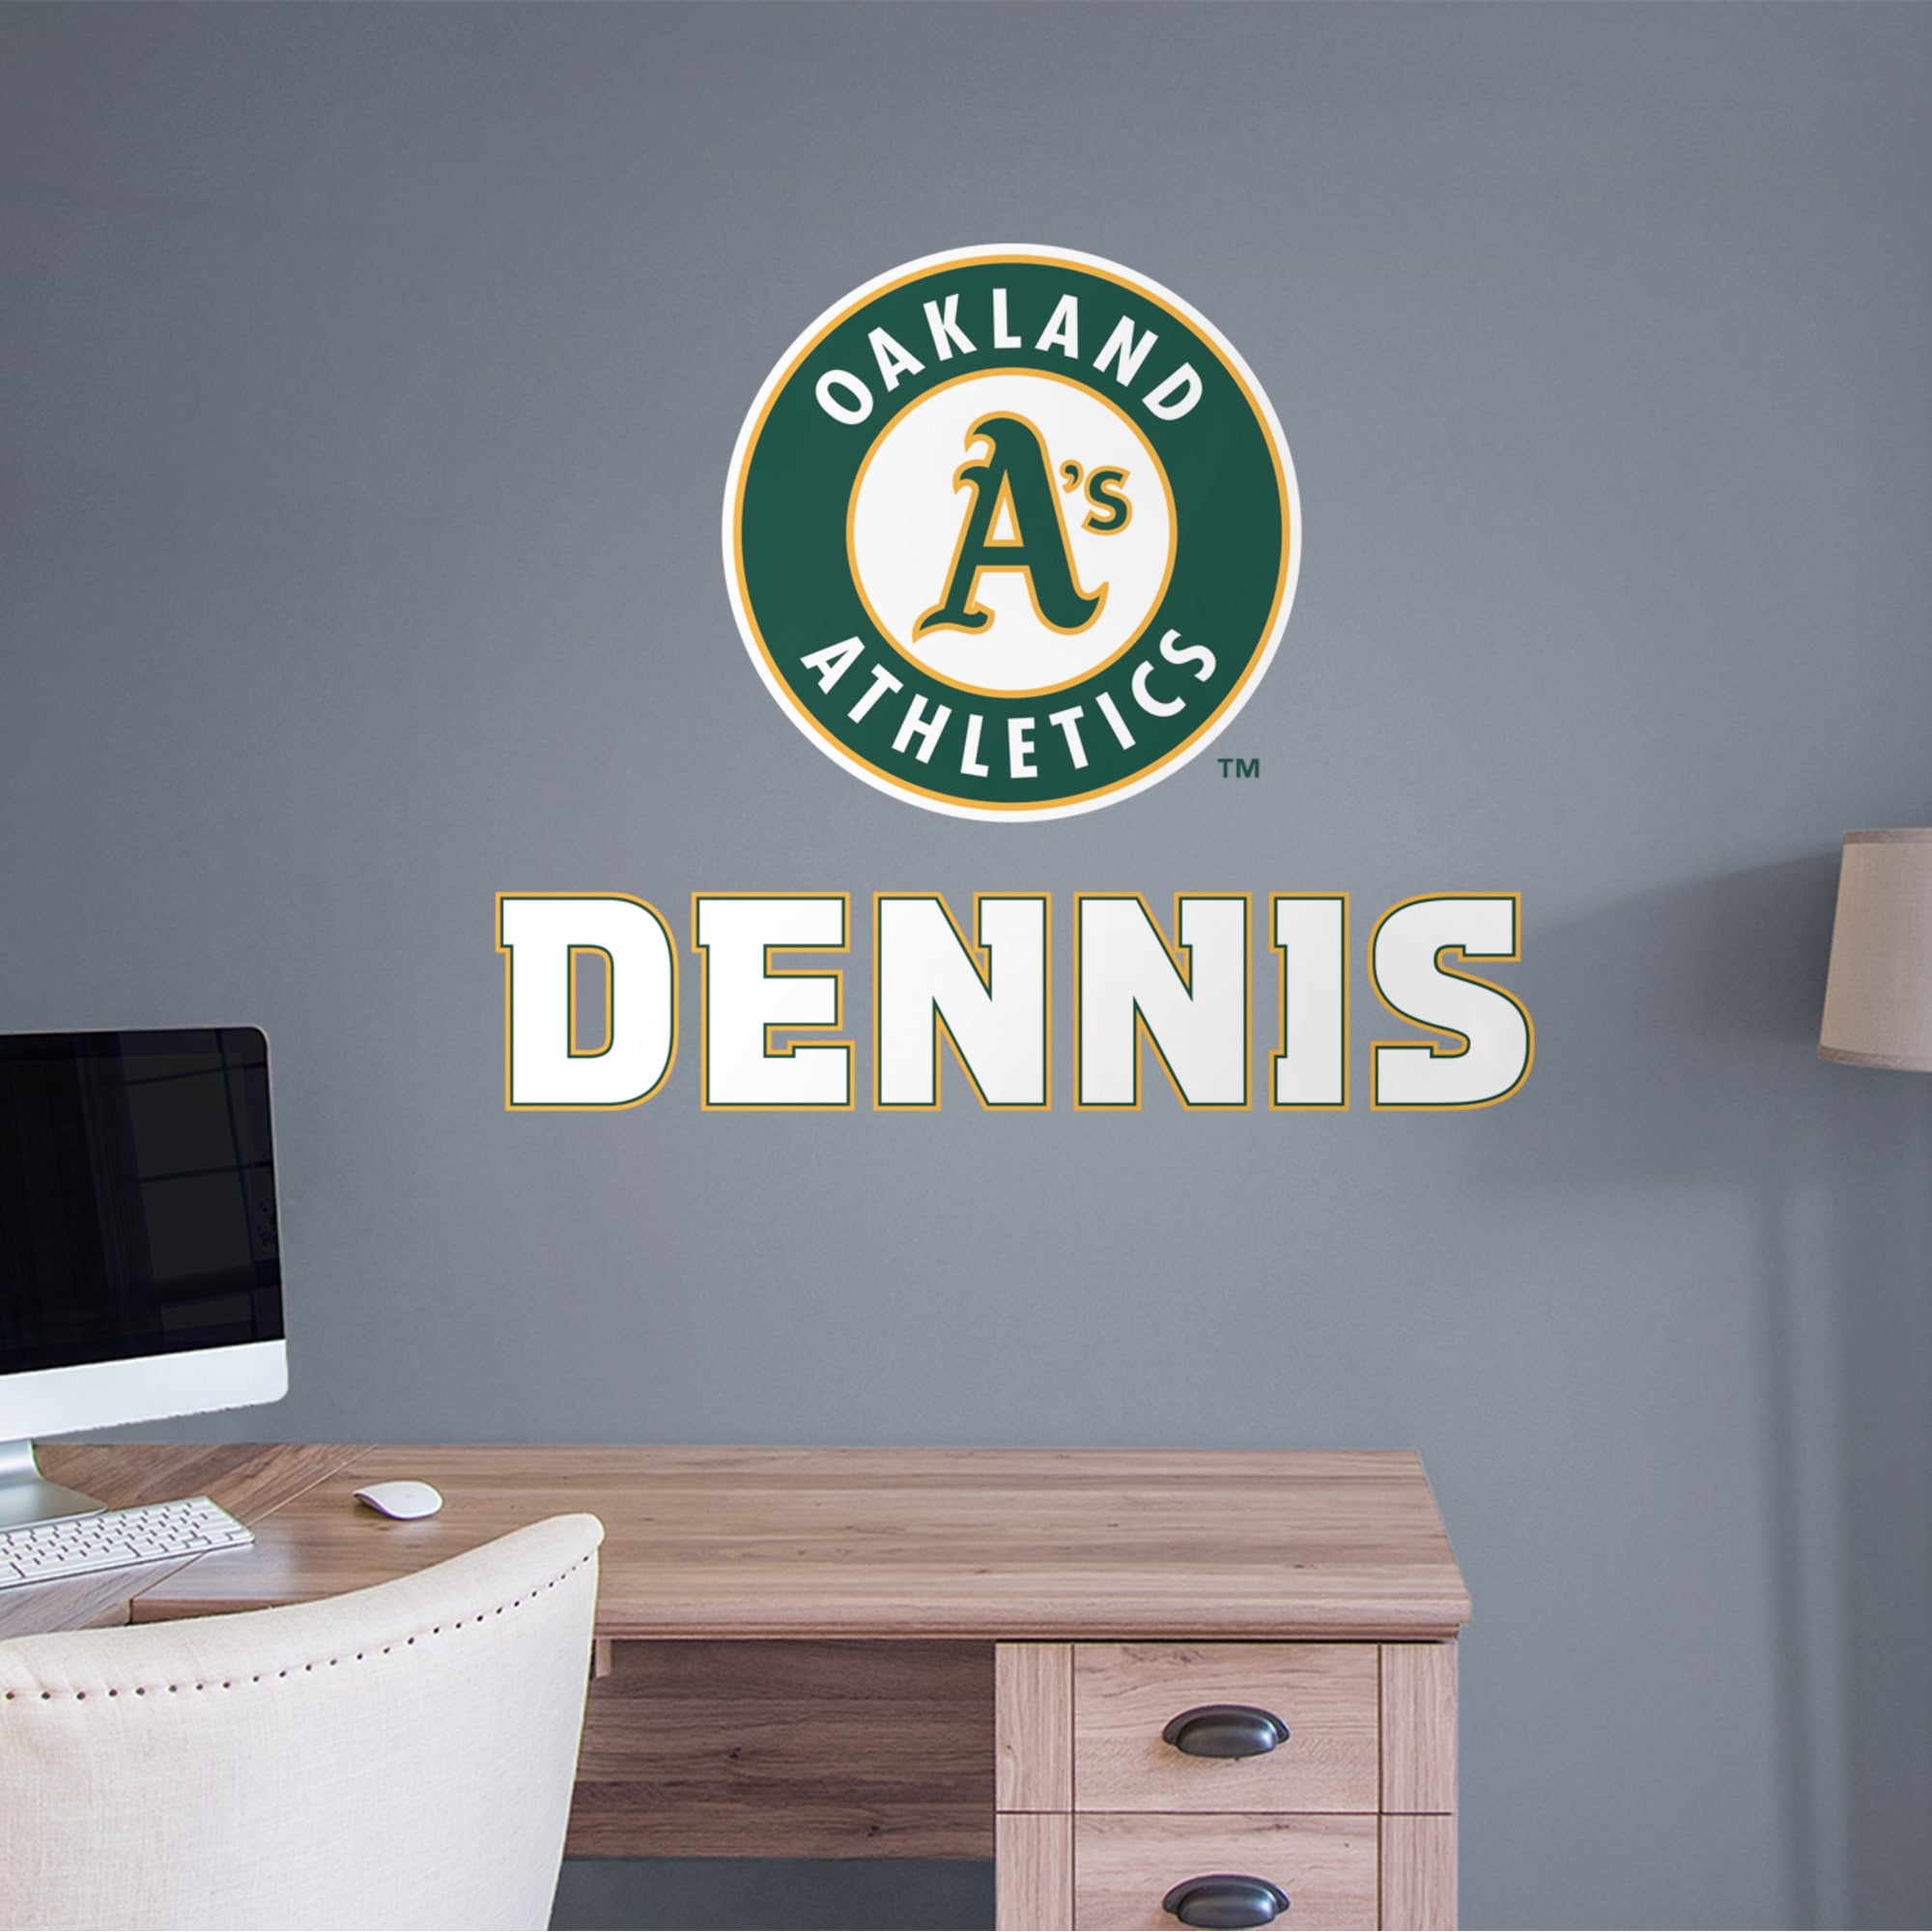 Oakland Athletics: Stacked Personalized Name - Officially Licensed MLB Transfer Decal in White (52"W x 39.5"H) by Fathead | Viny